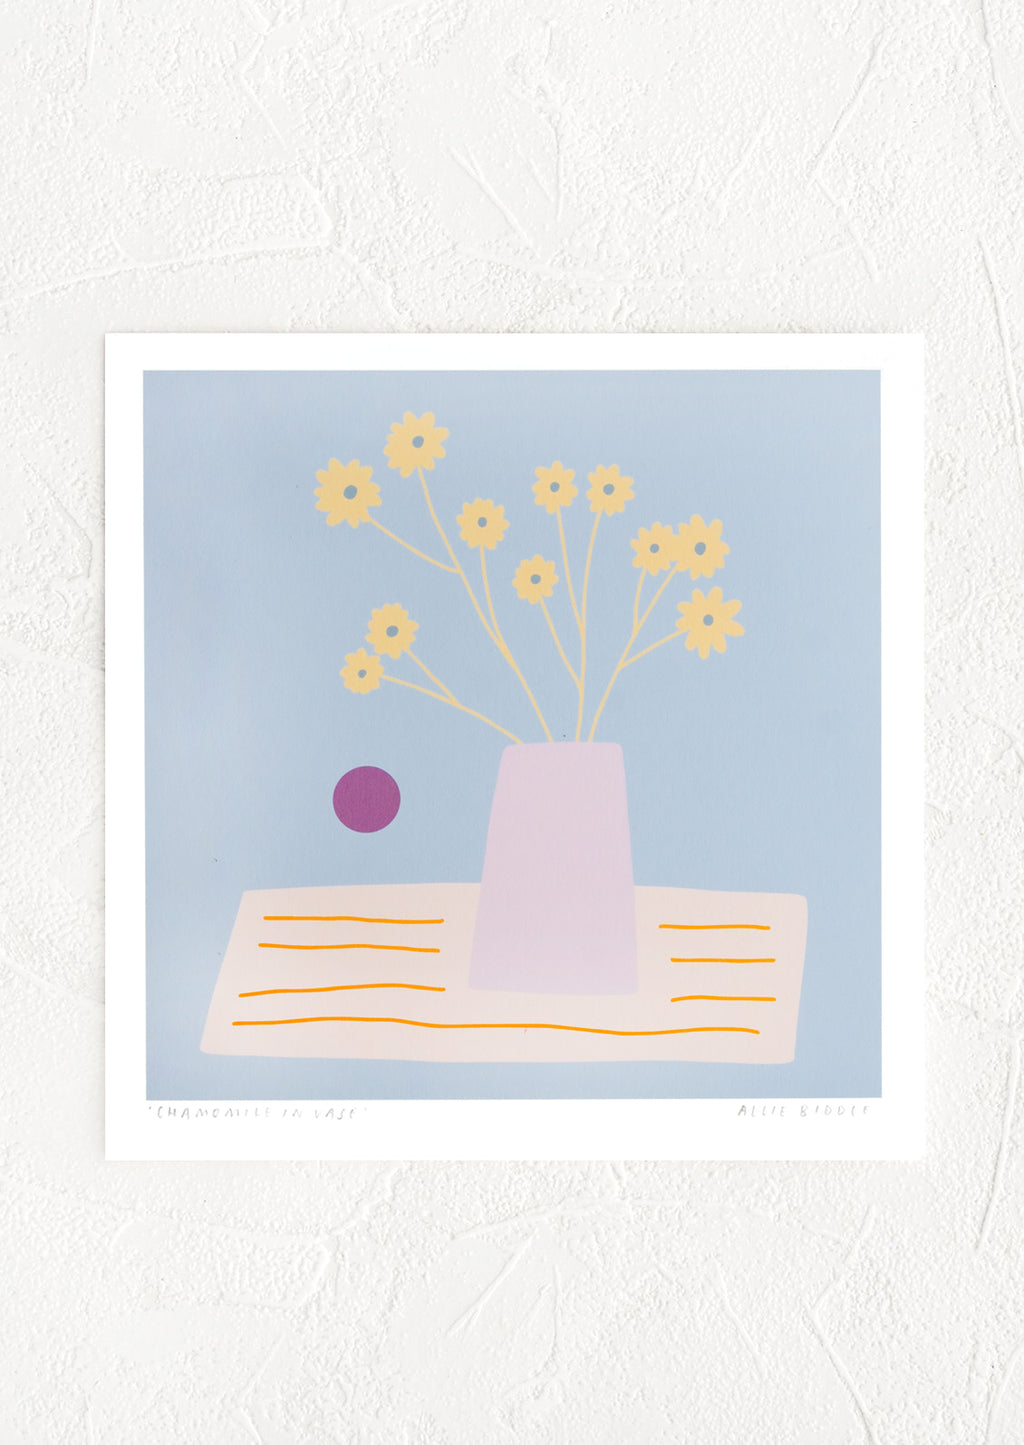 1: A digital art print with illustration of a vase of flowers on a striped blanket.